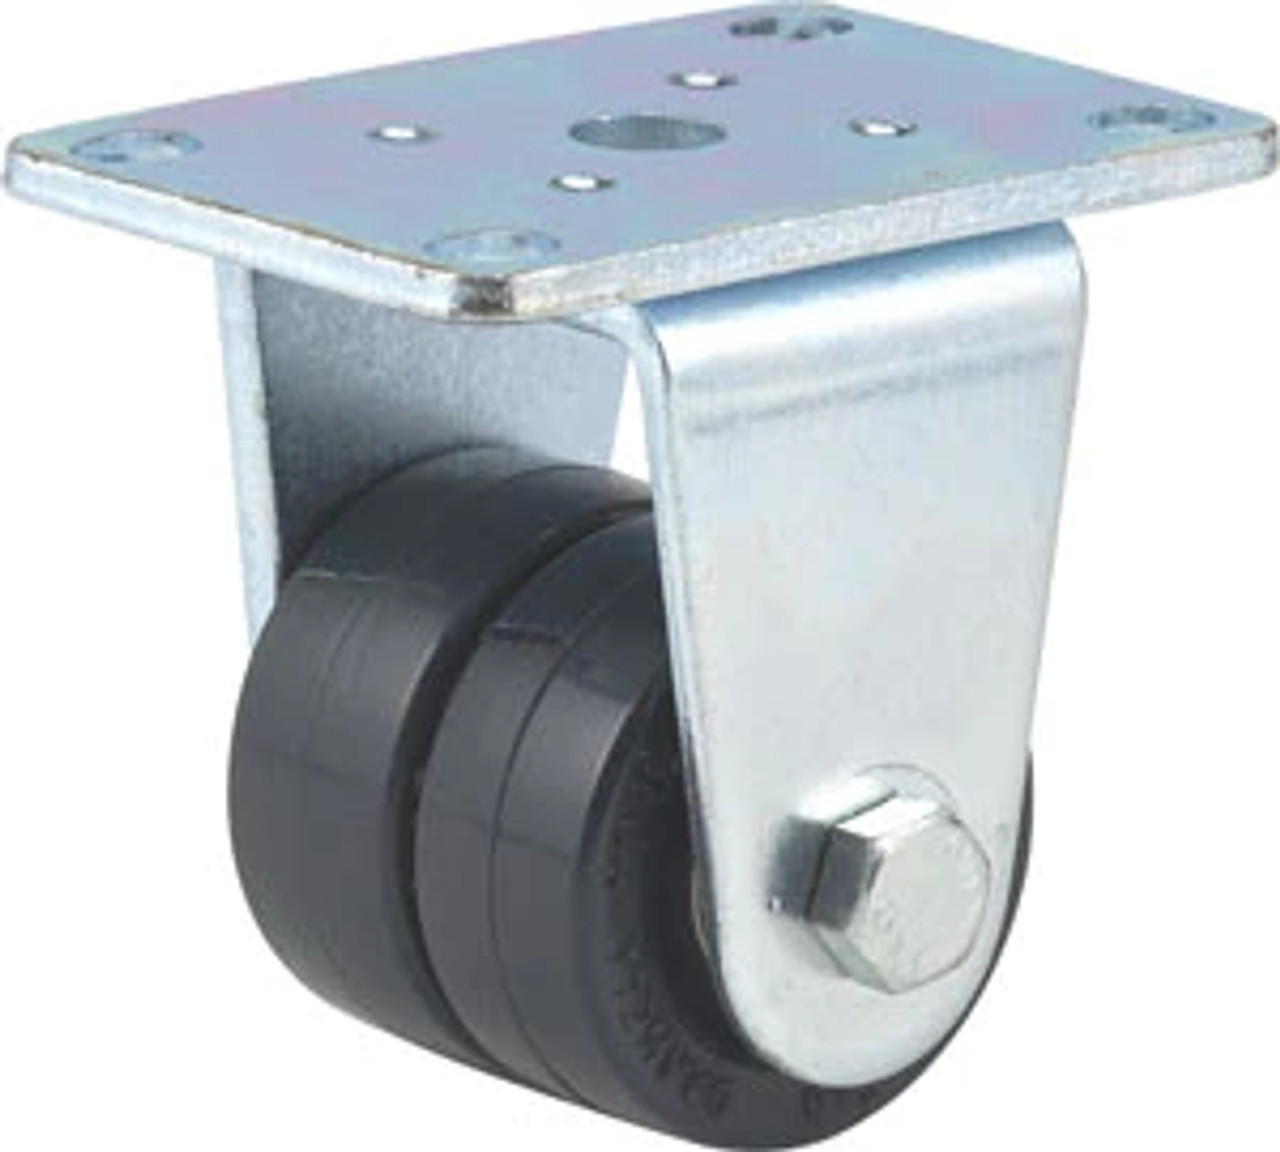 32-20-XRH dual Wheel rigid caster from Darnell-Rose